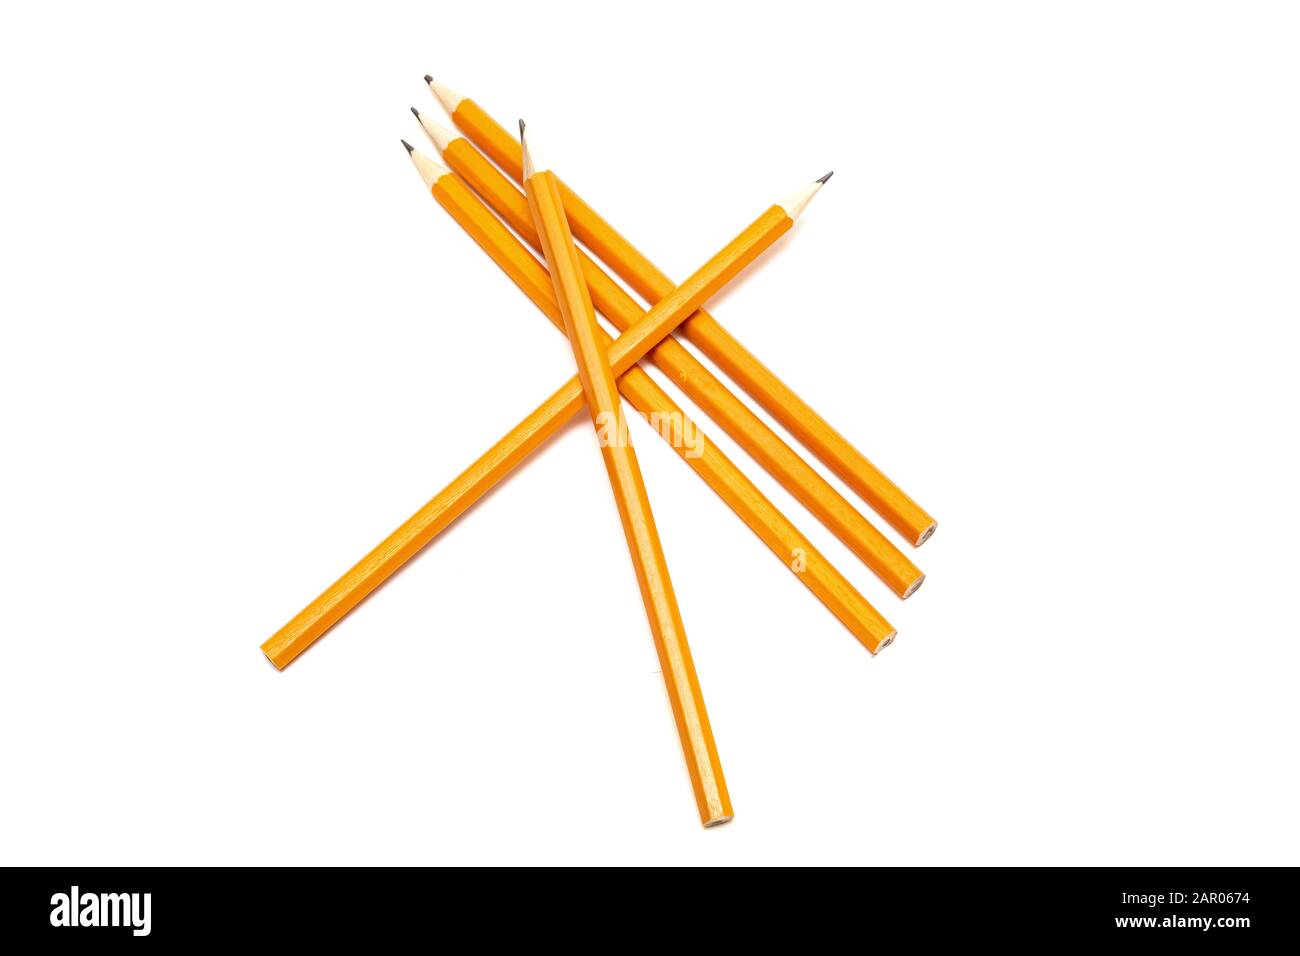 Five pencils on white background, isolated on white background Stock Photo